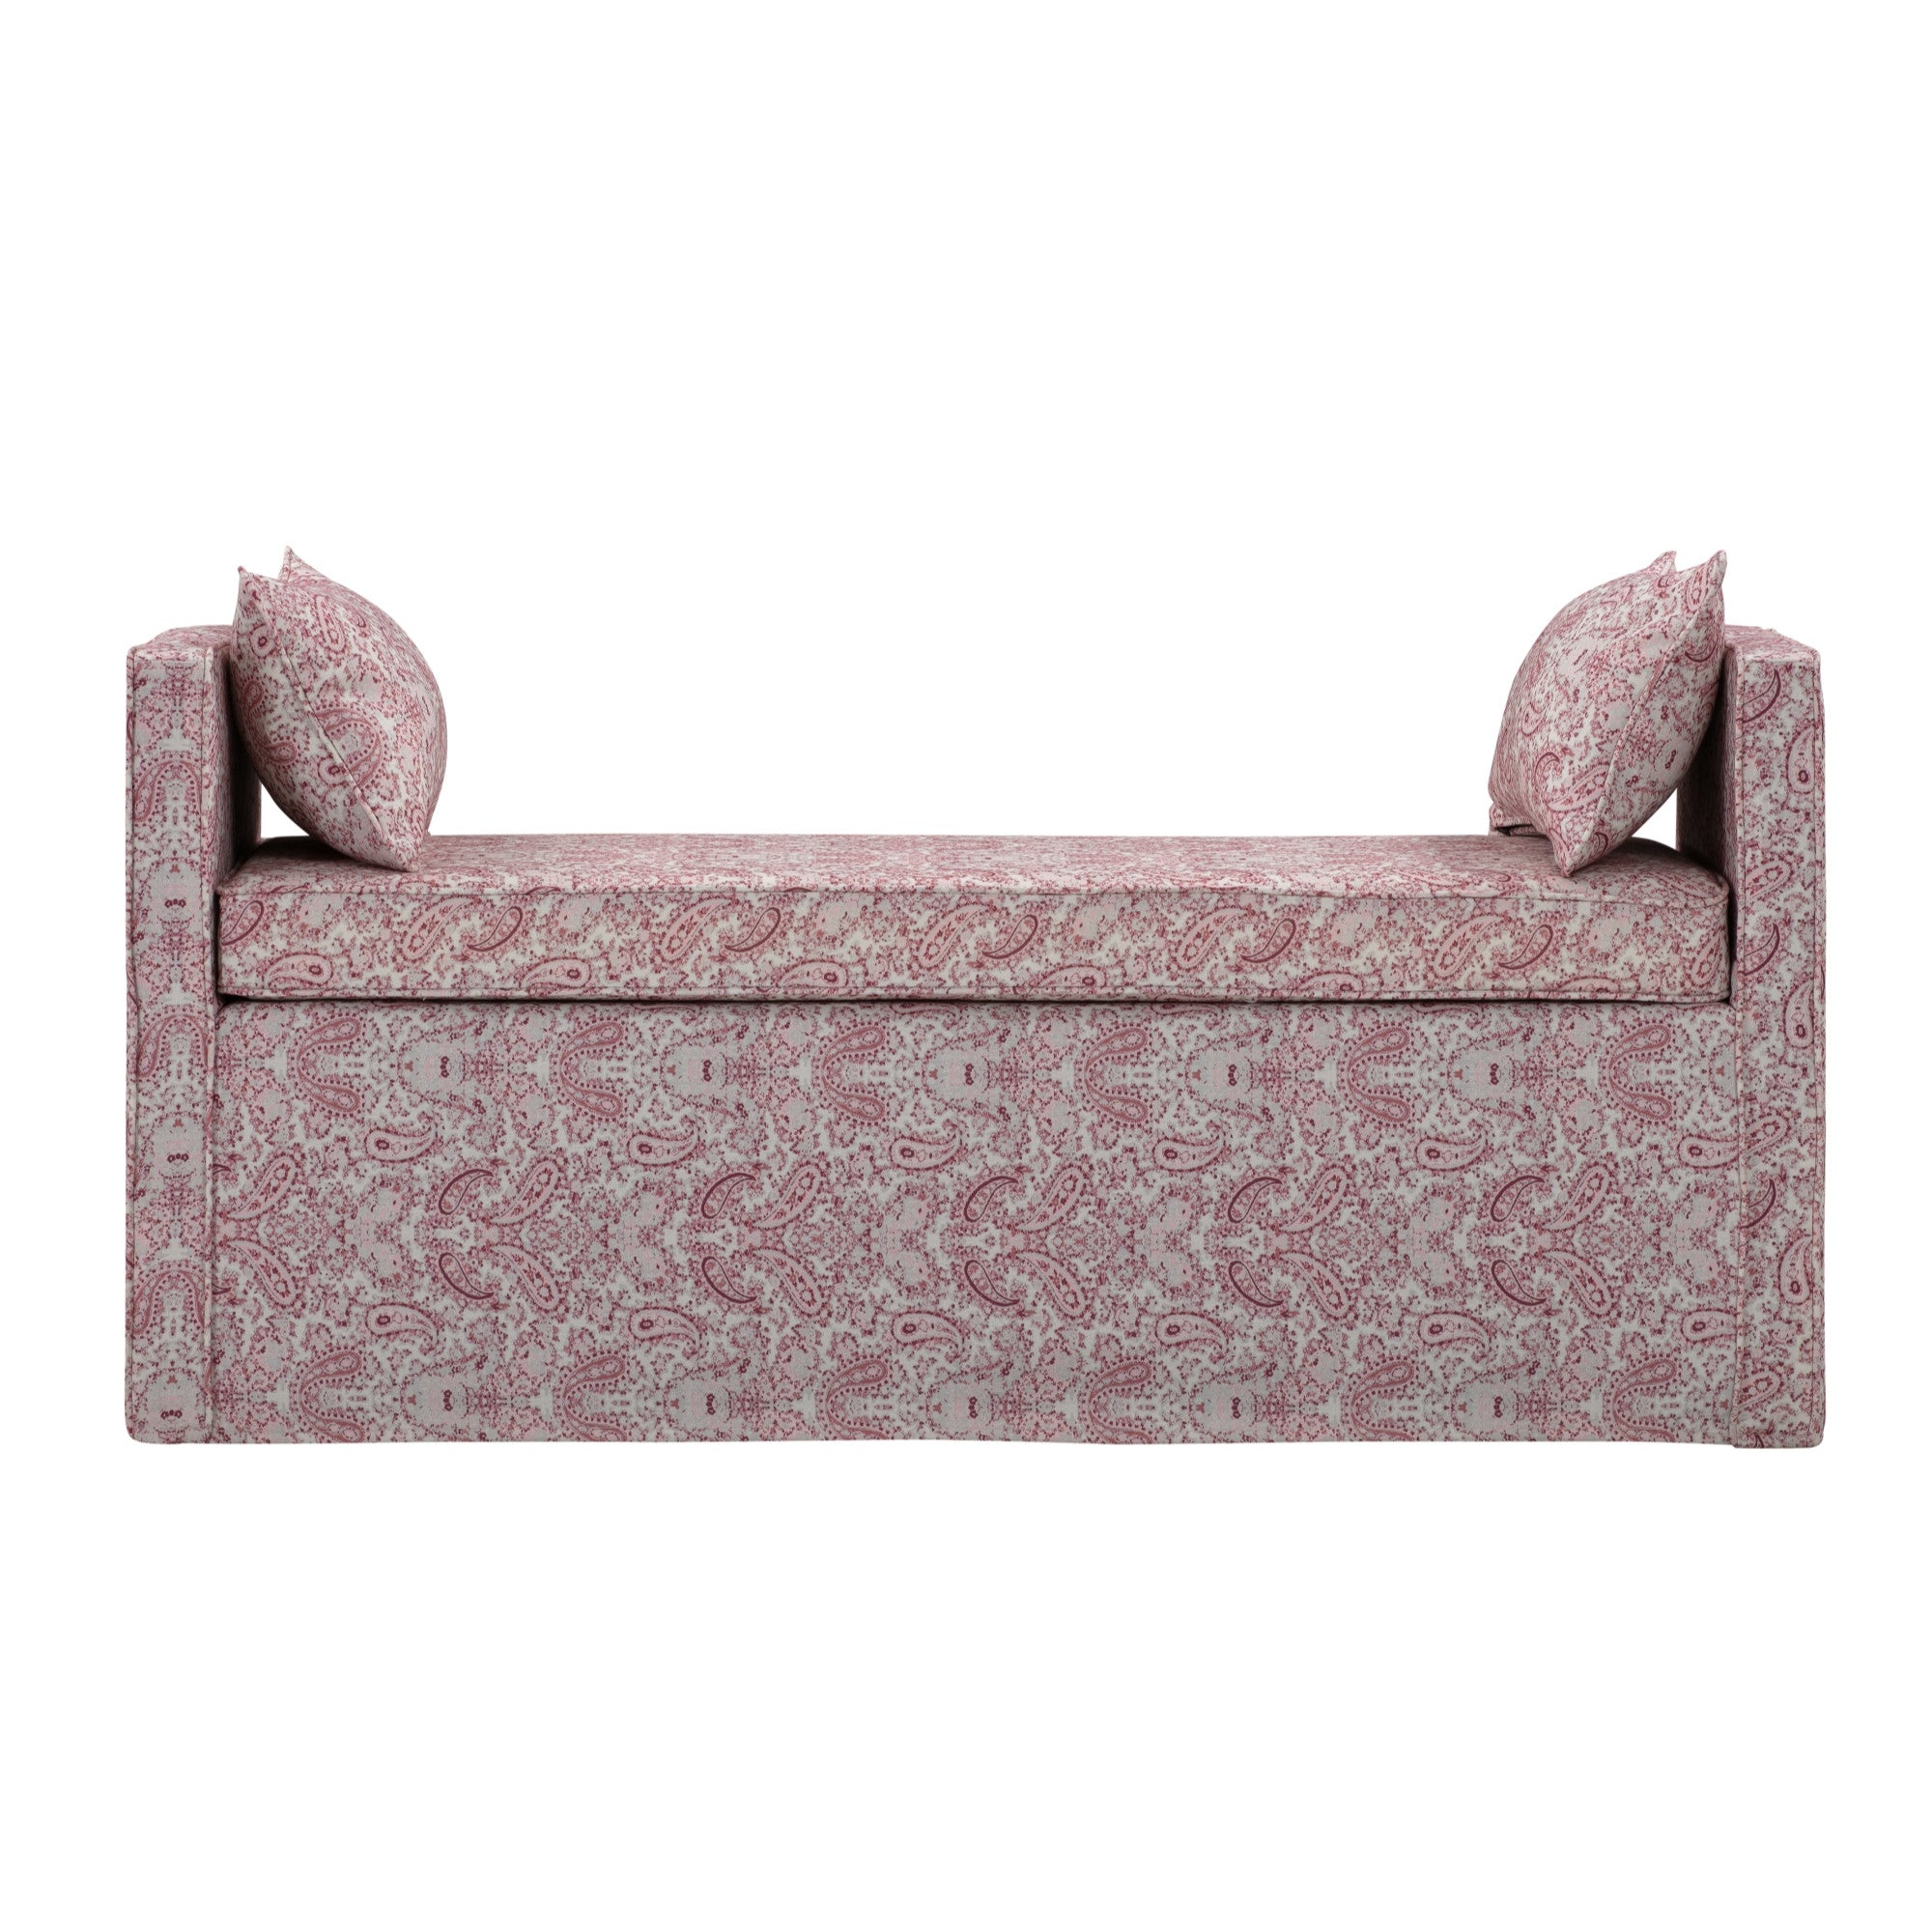 53" Light Gray And Black Upholstered Linen Floral Bench